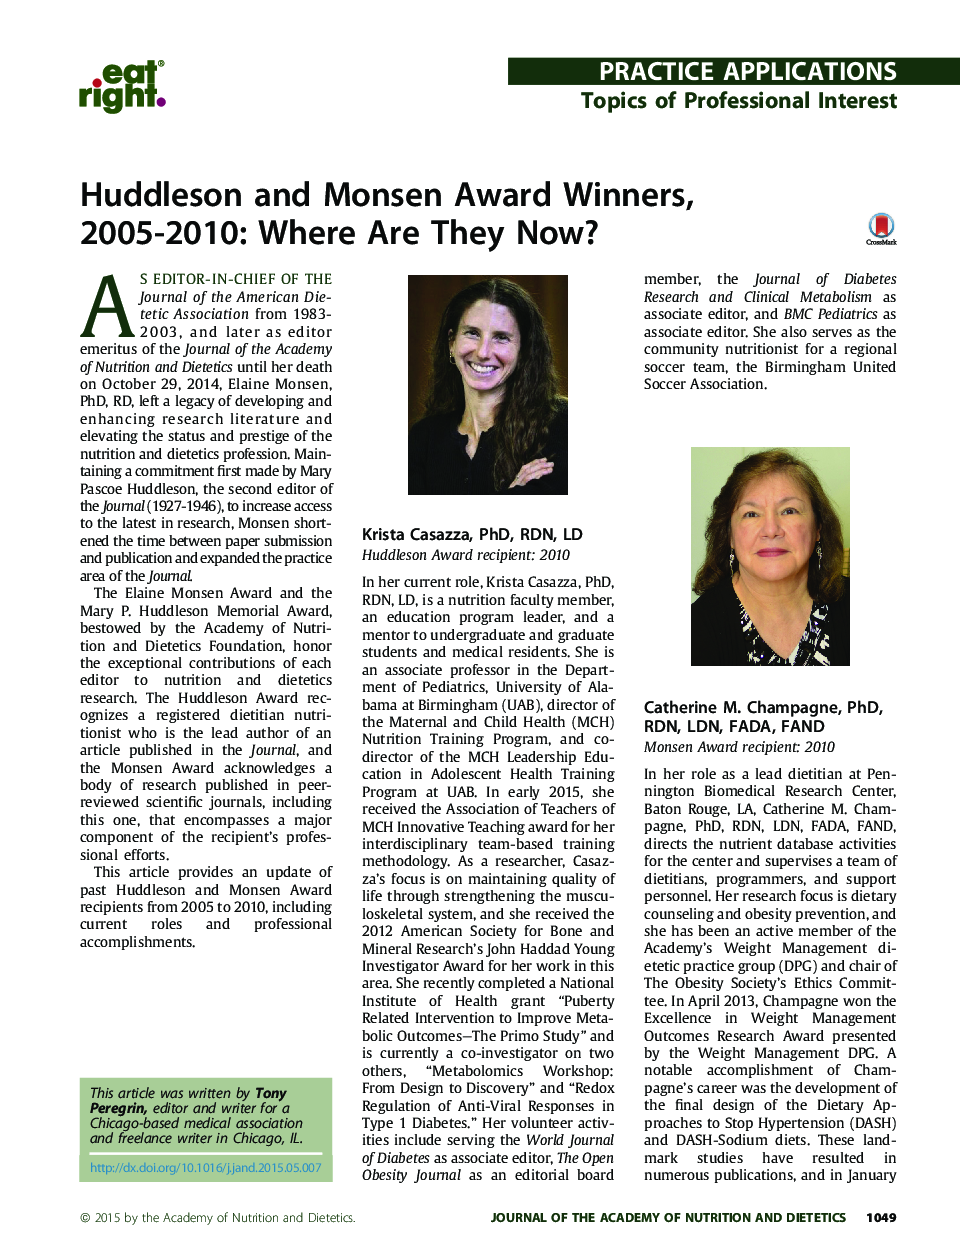 Huddleson and Monsen Award Winners, 2005-2010: Where Are They Now?